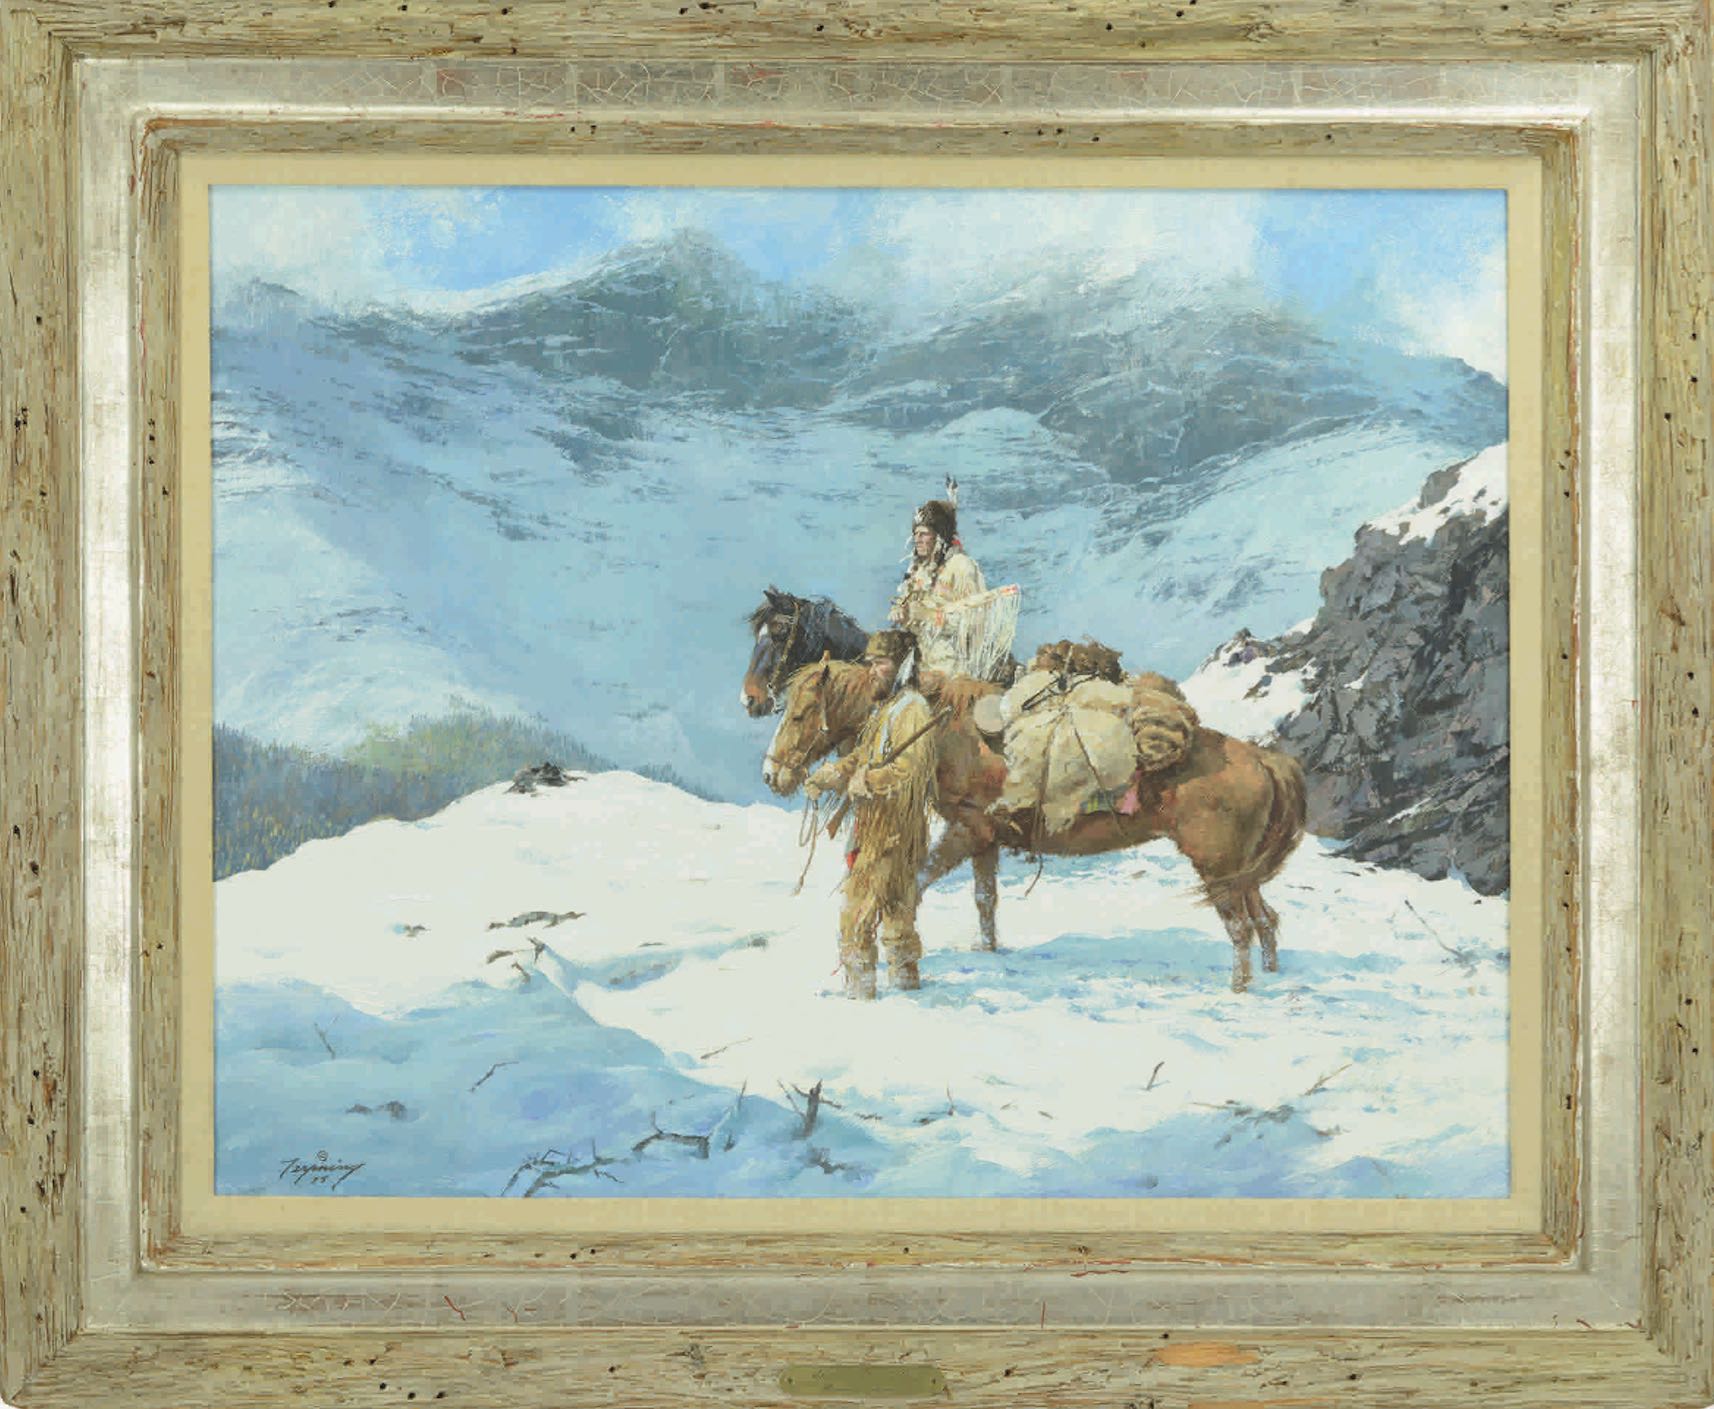 Howard A. Terpning's "Spring Came Early" Realized $94,800.